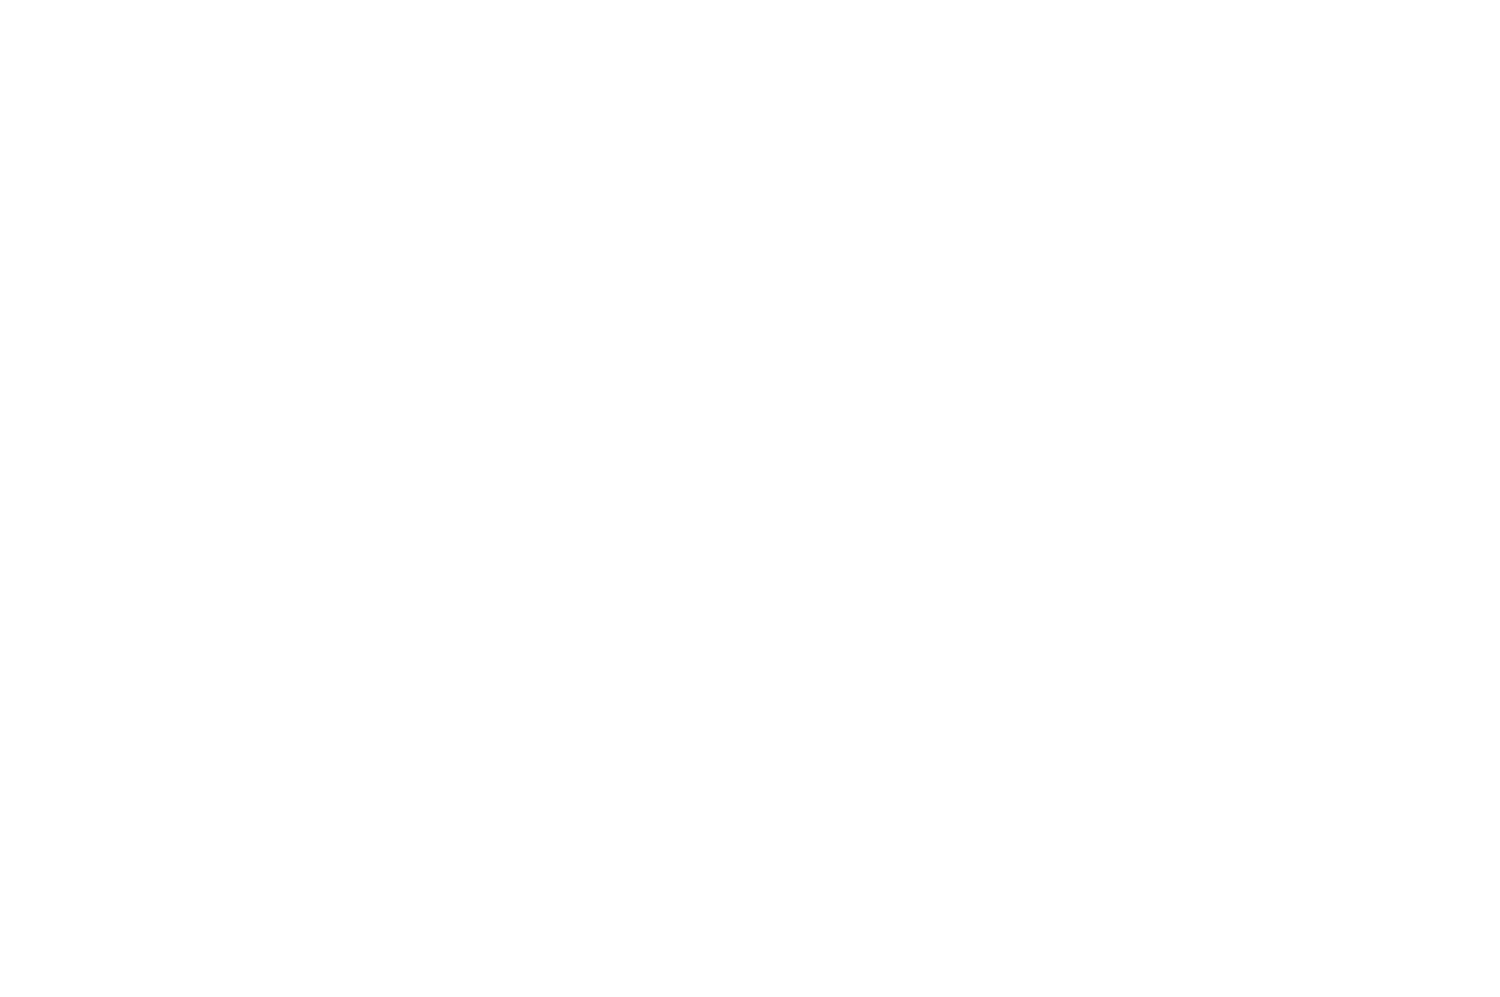 FAME - WE DESIGN AND CREATE SPACE FOR PEOPLE, BRANDS AND PRODUCTS